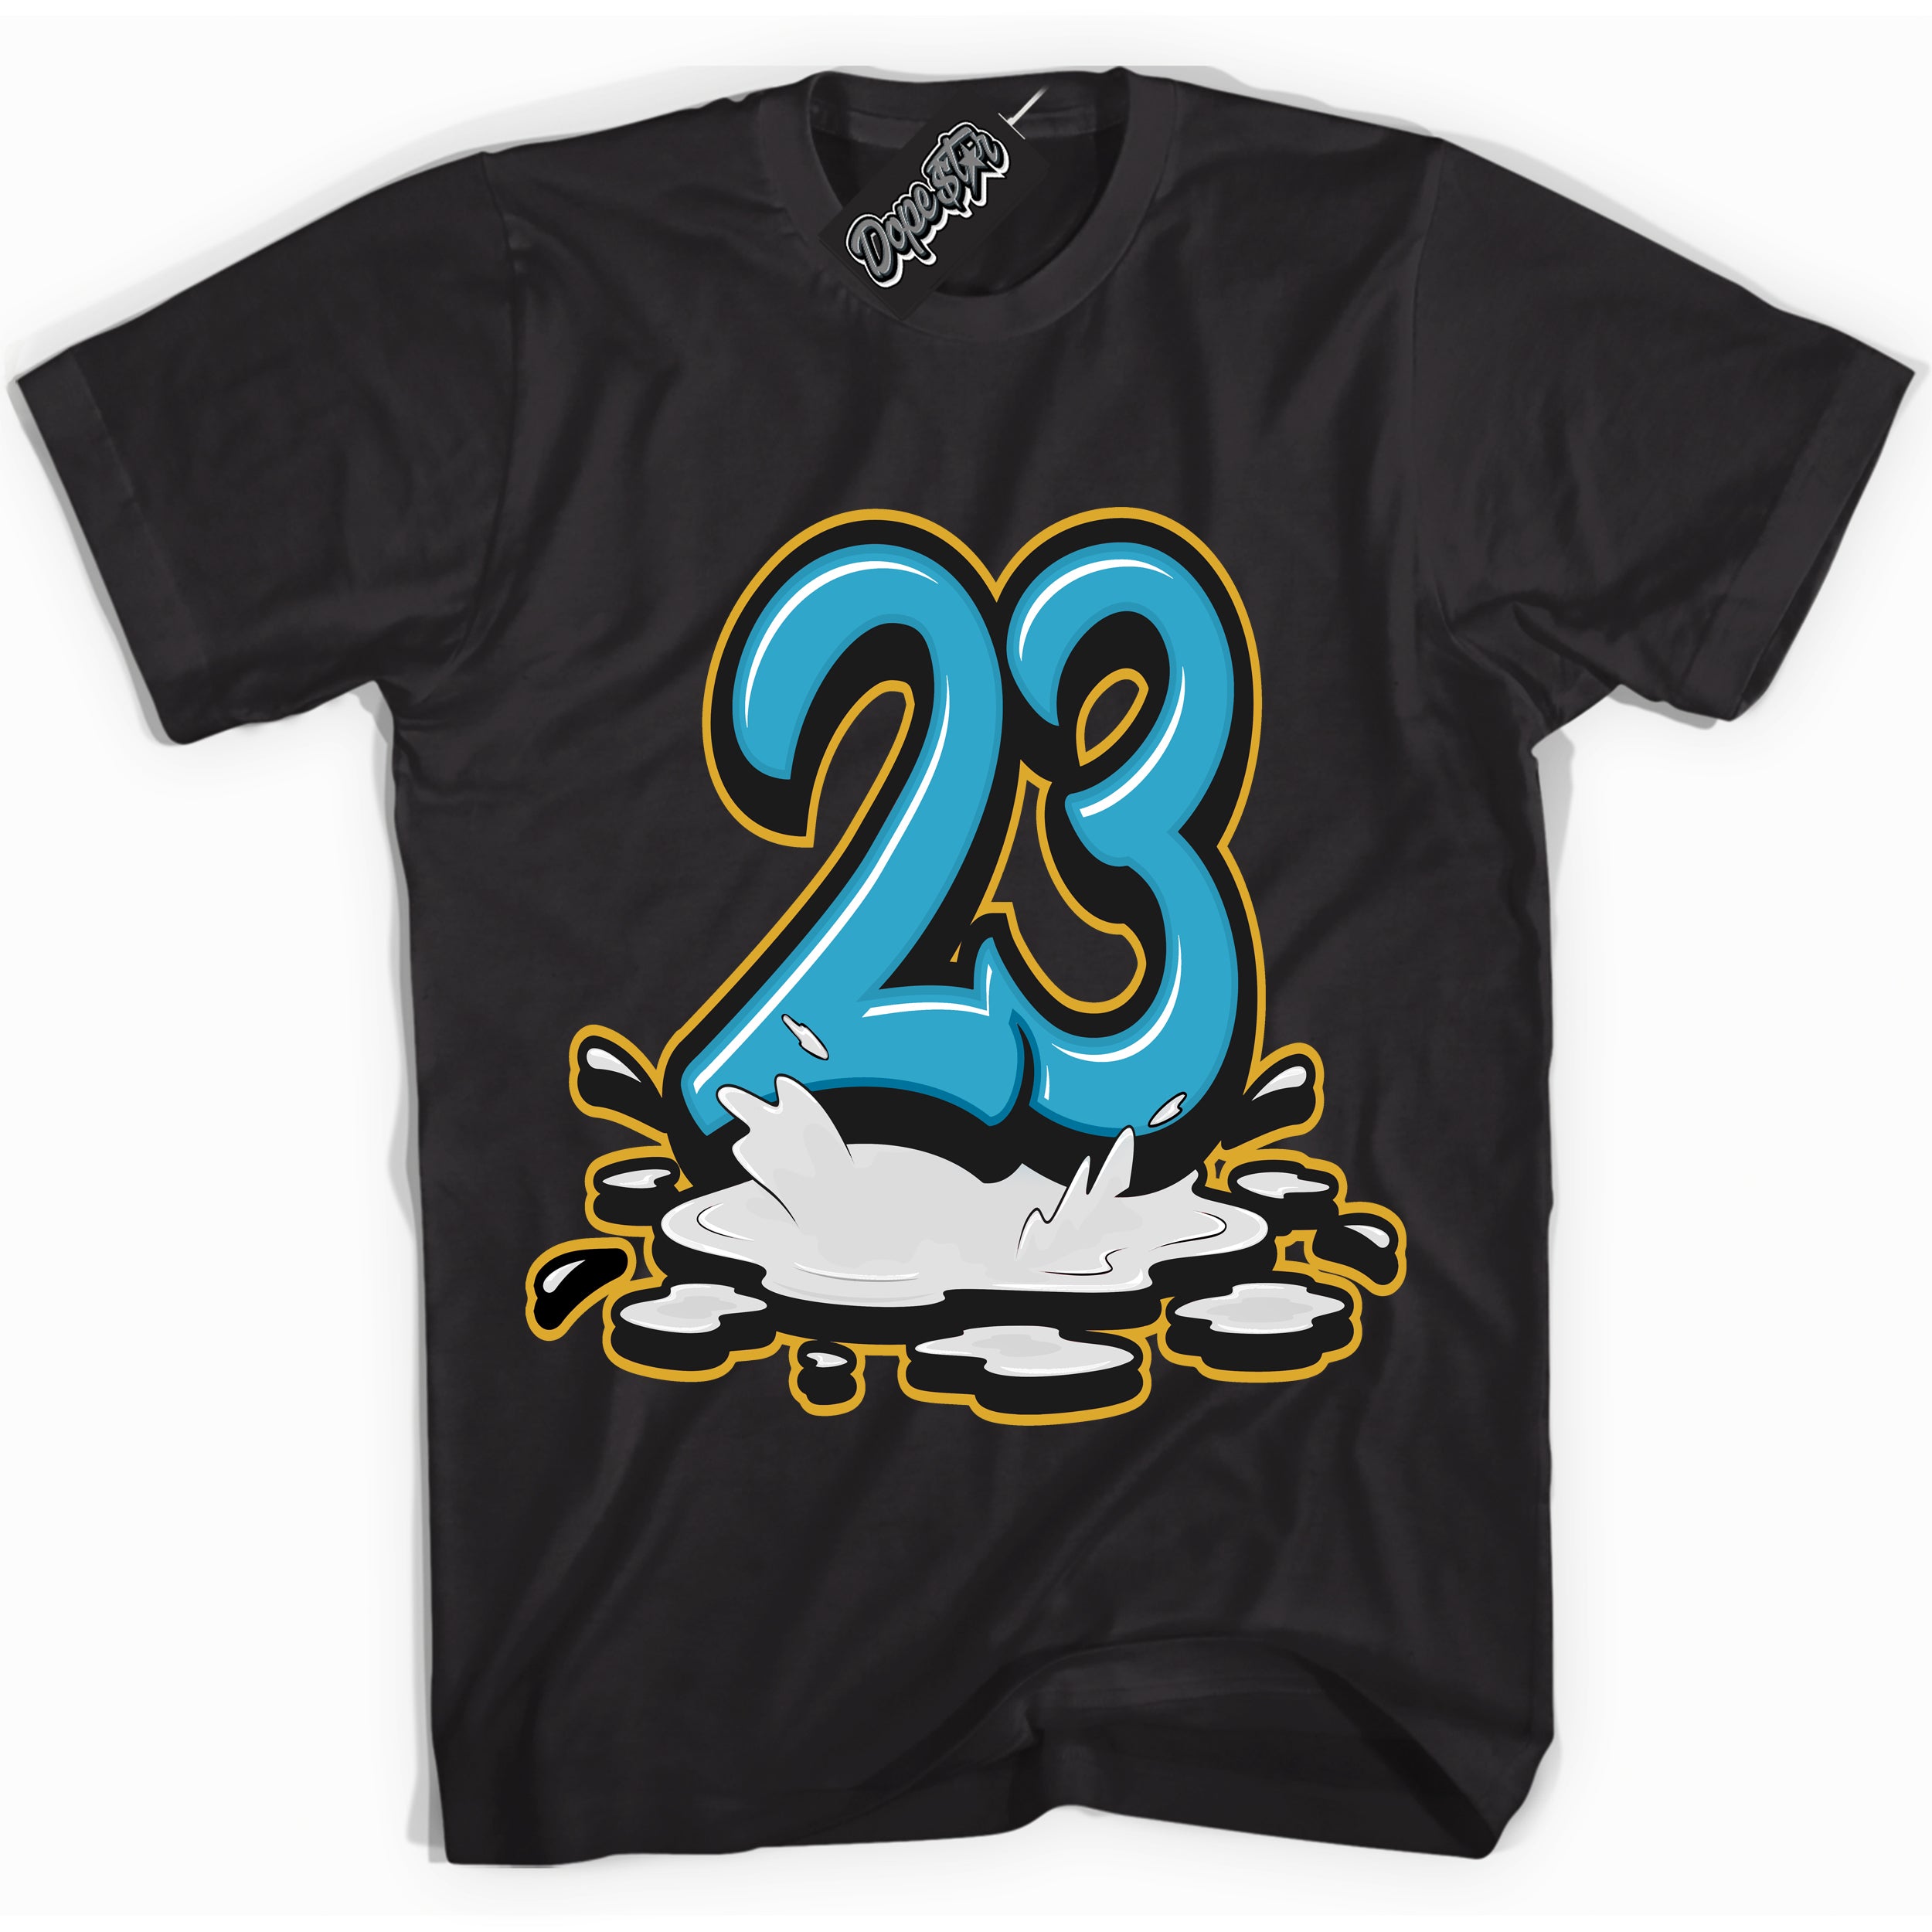 Cool Black Shirt with “ 23 Melting” design that perfectly matches Aqua 5s Sneakers.